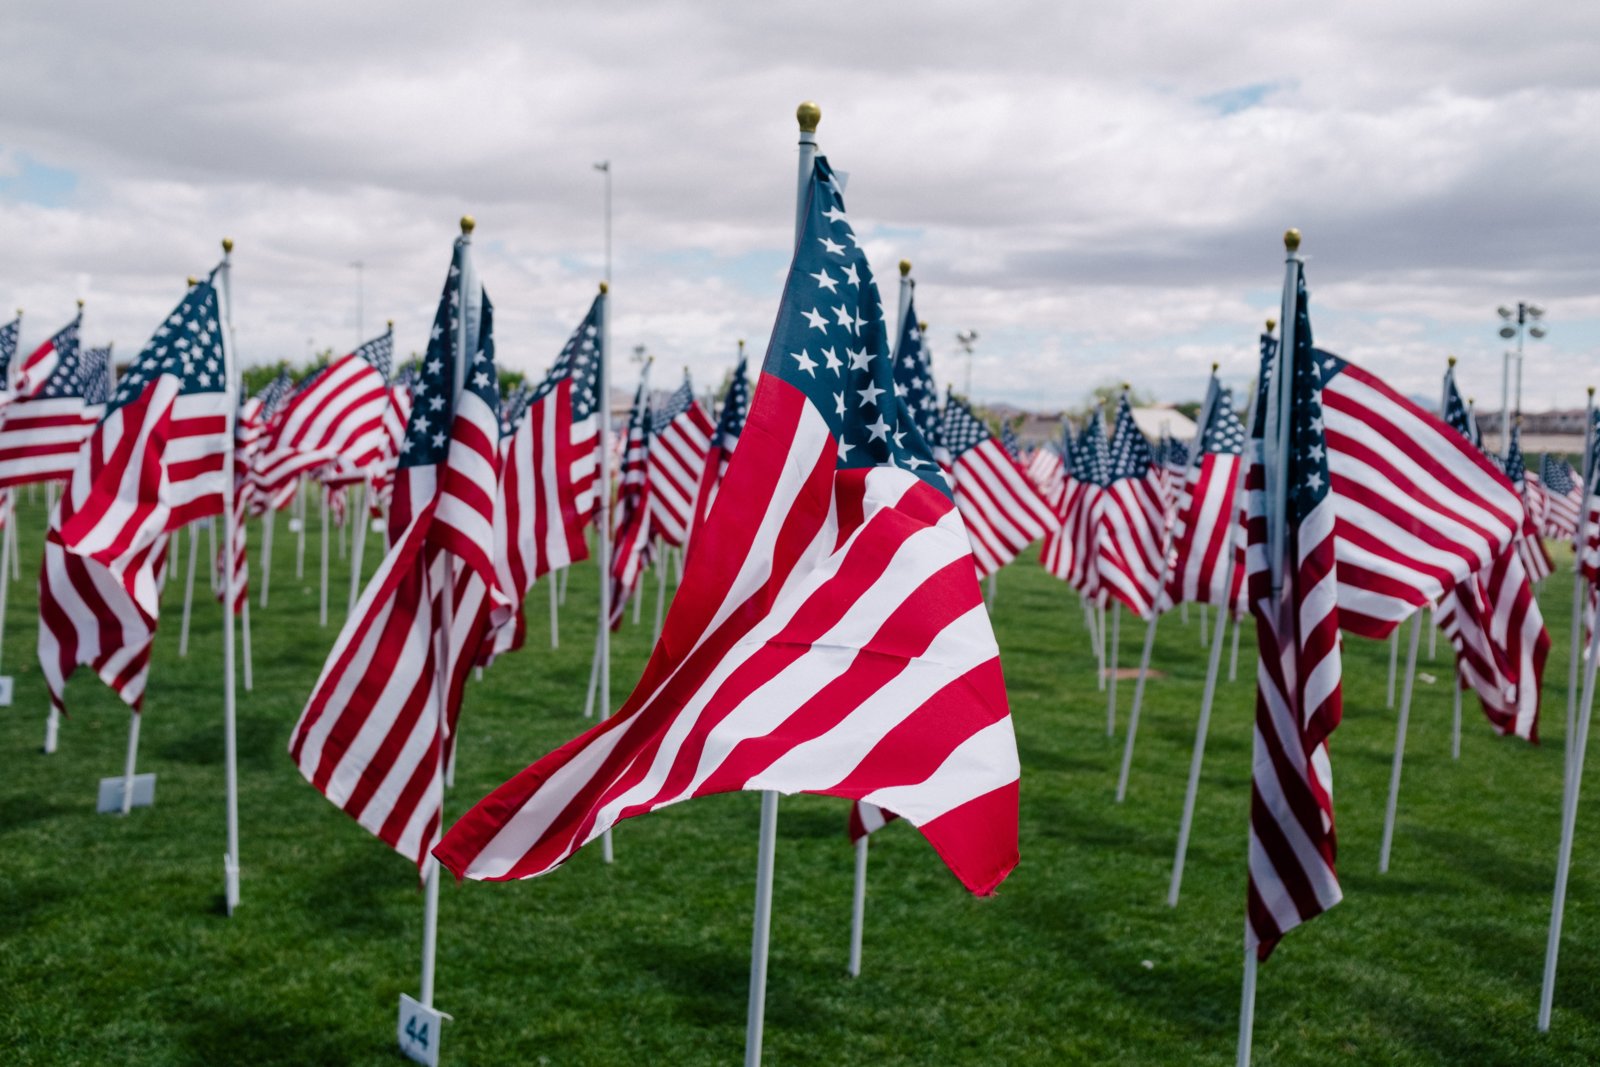 America Flags in ground